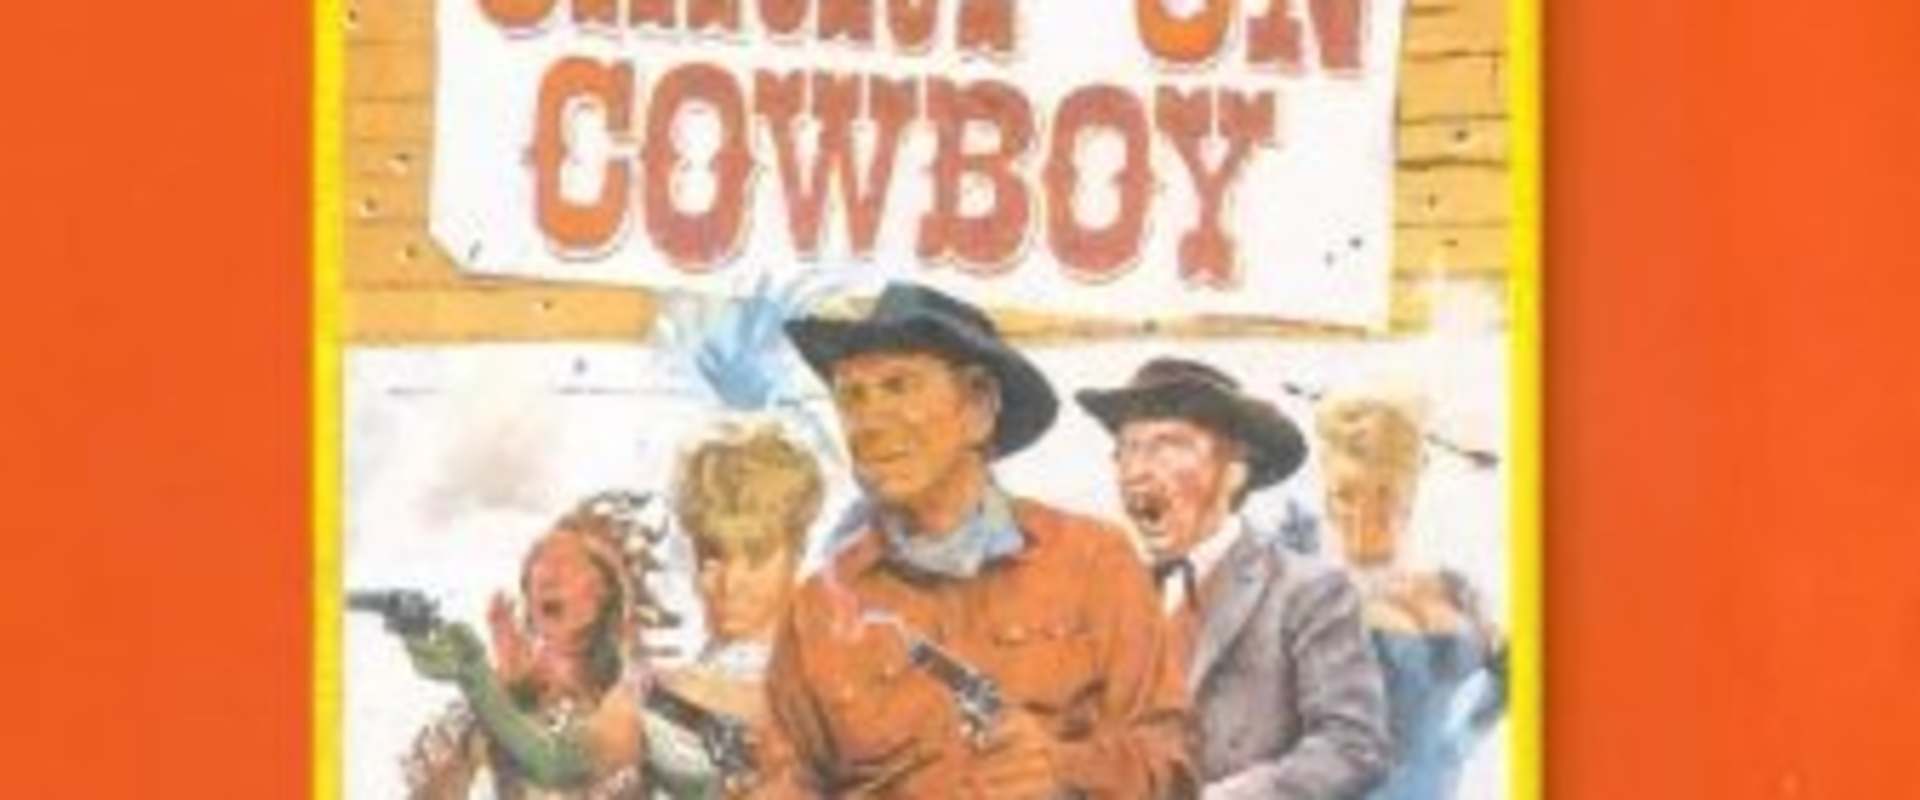 Carry on Cowboy background 2